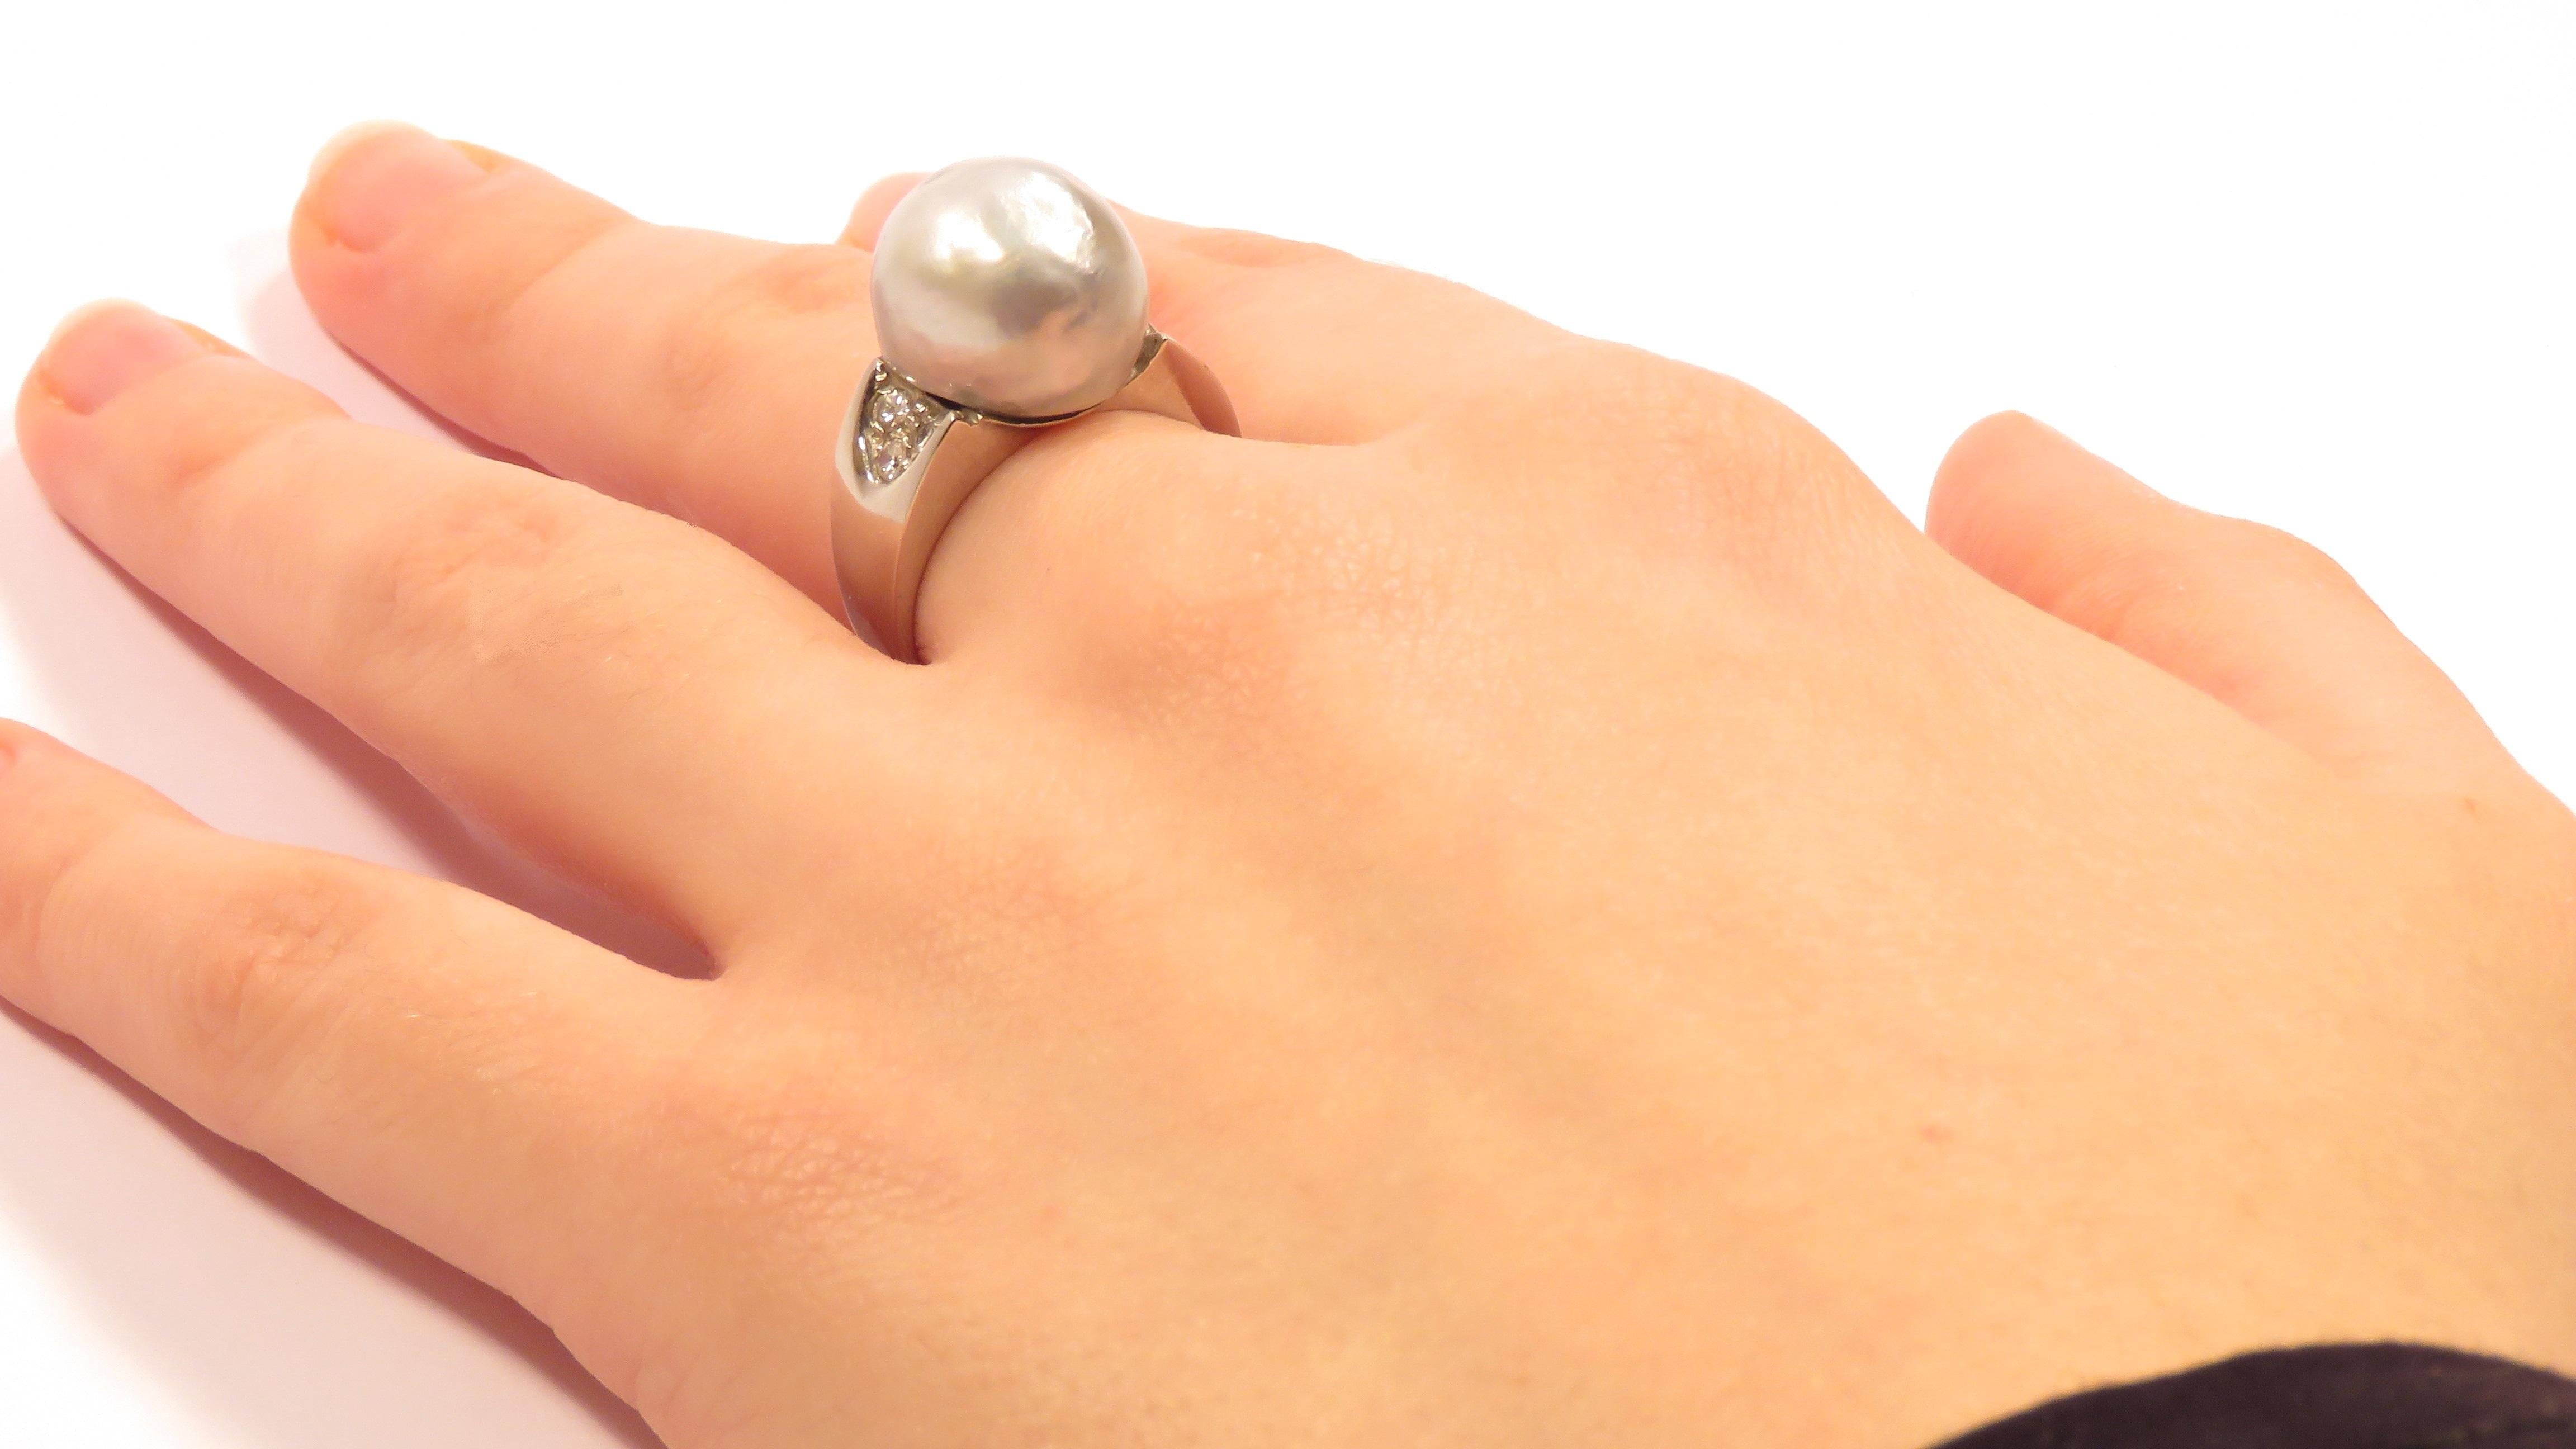 Contemporary White Australian Pearl Diamonds 18 Karat White Gold Ring Handcrafted in Italy